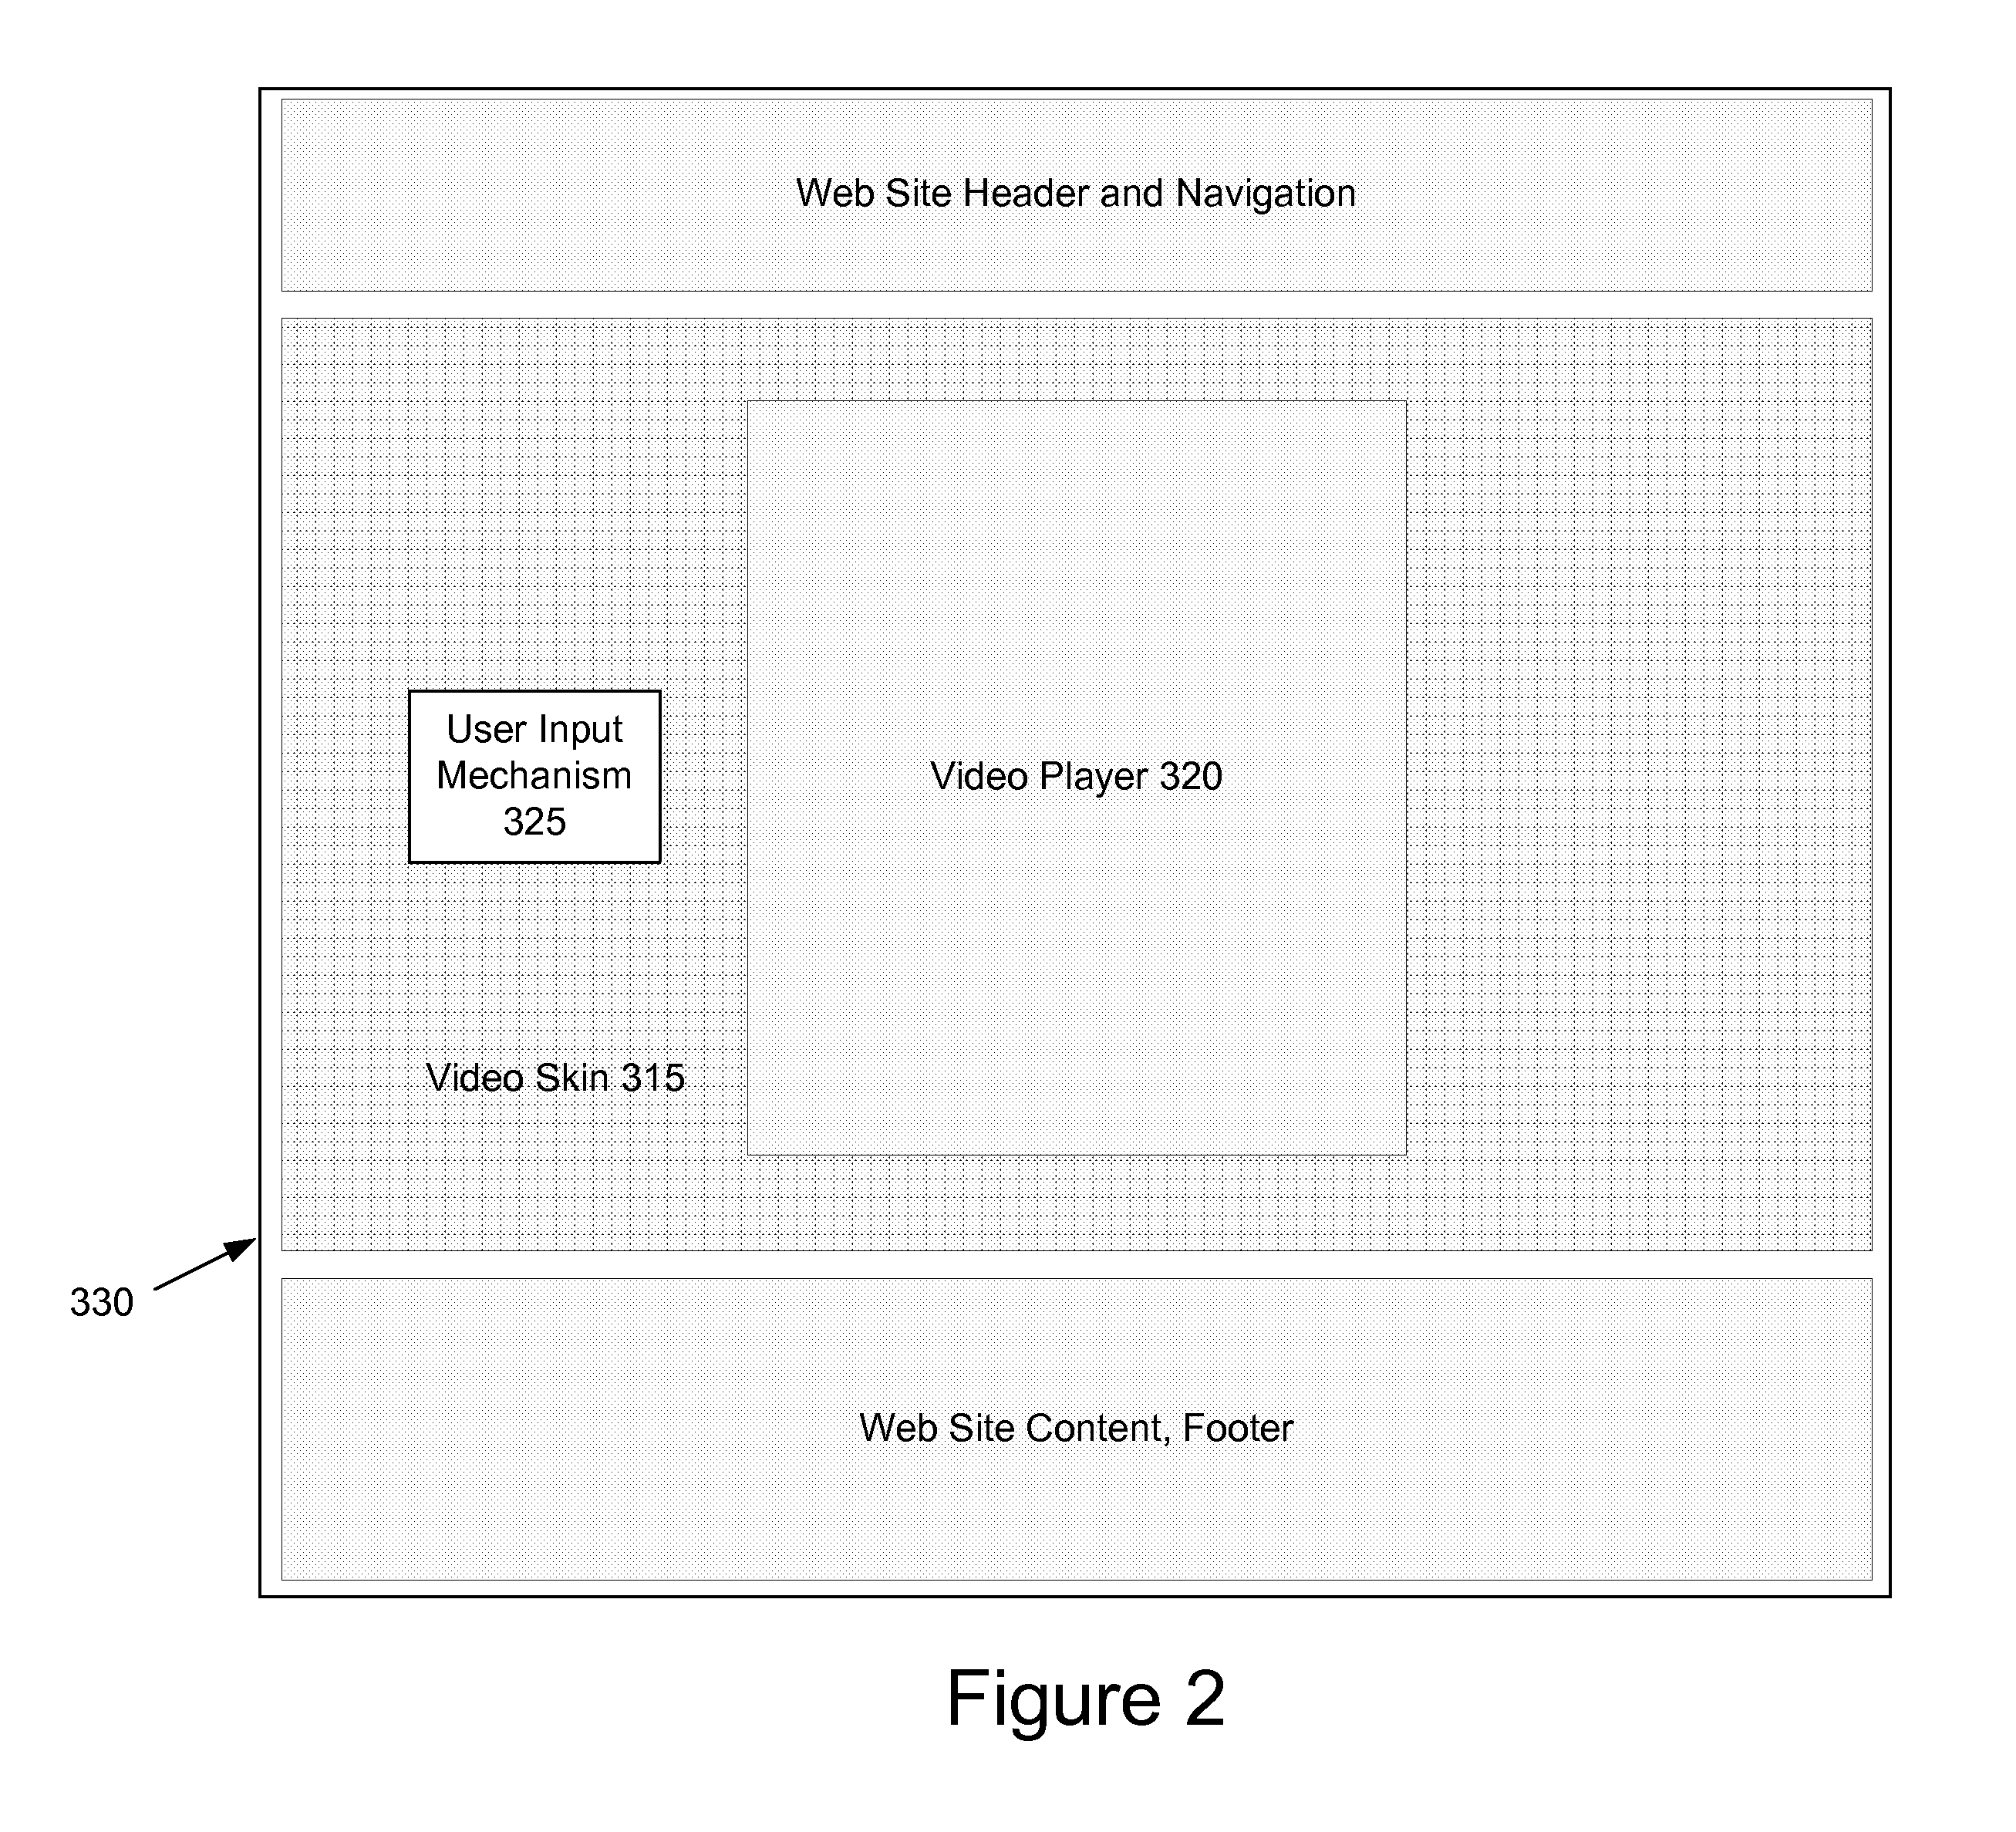 System and Method for Providing Sequential Video and Interactive Content